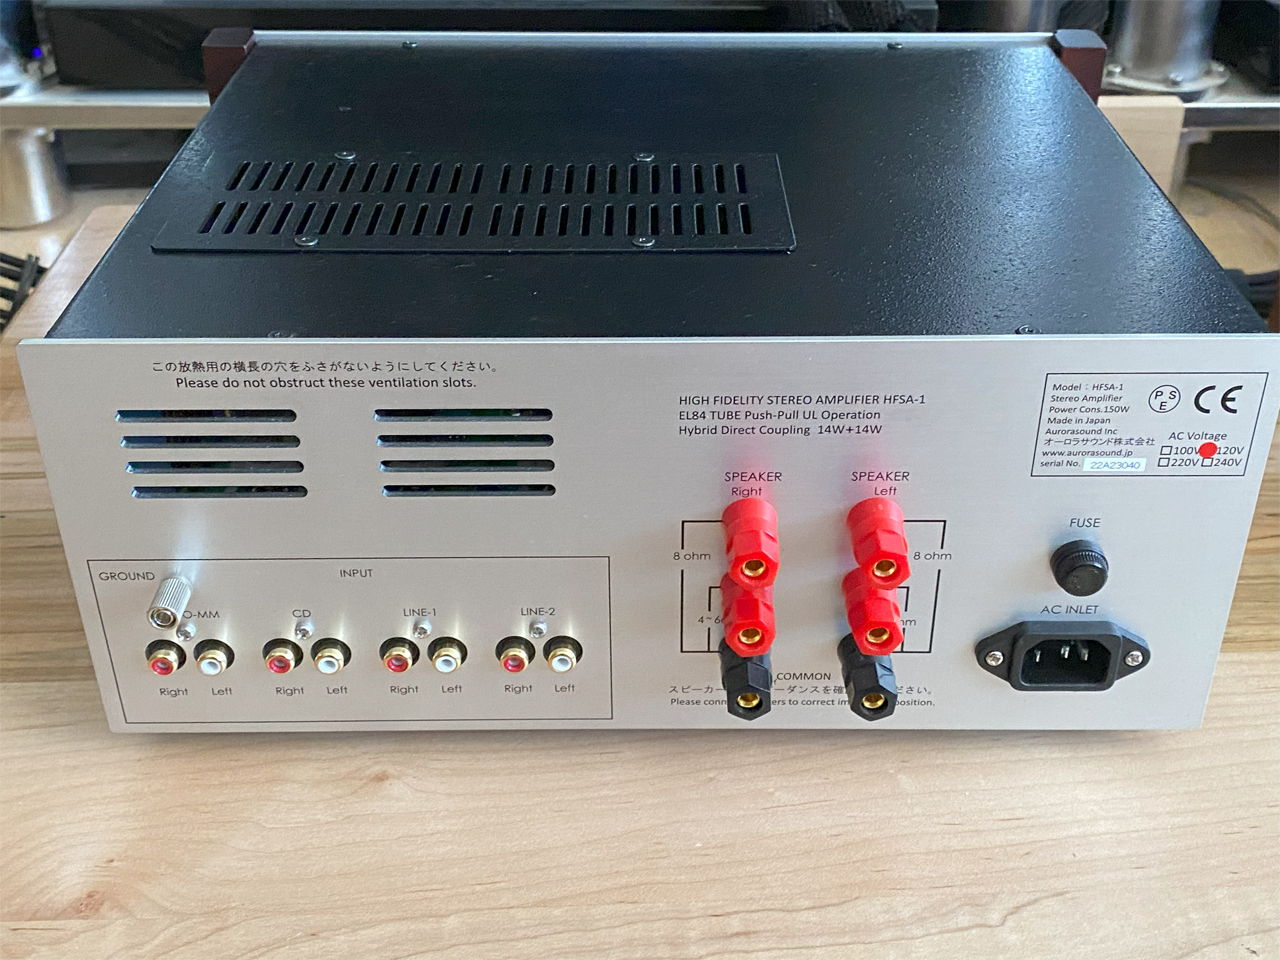 Aurorasound HFSA-01 Integrated Tube Amplifier - demo unit in excellent condition